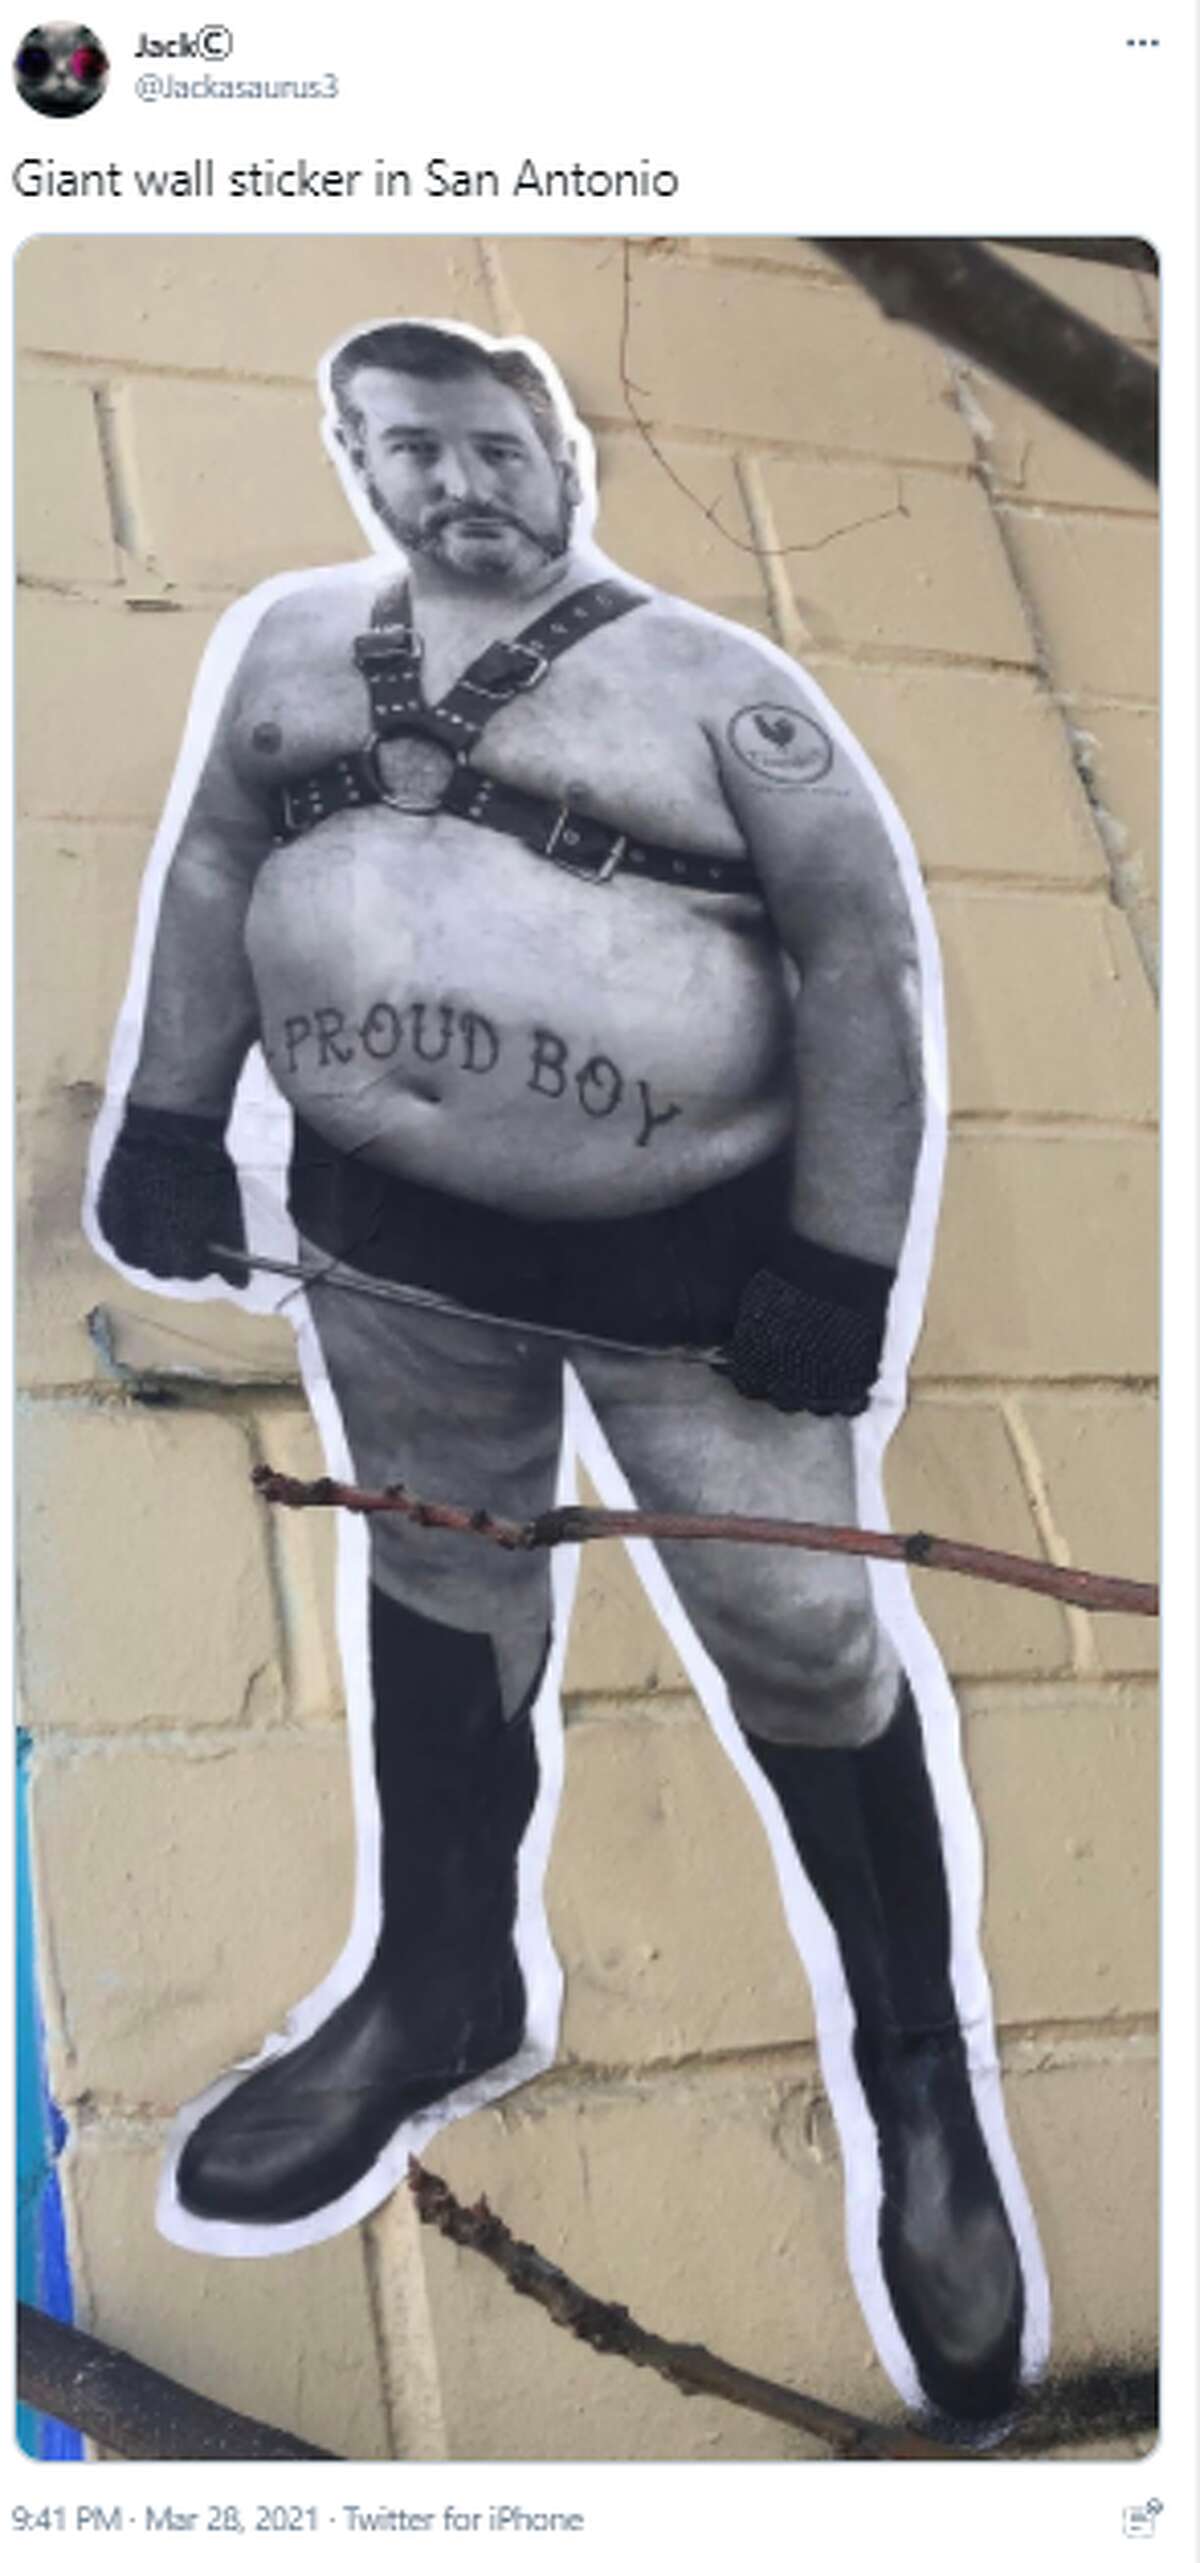 Giant stickers depicting a shirtless U.S. Sen. Ted Cruz wearing a leather harness and a "Proud Boy" tattoo have popped on the sides of San Antonio buildings.